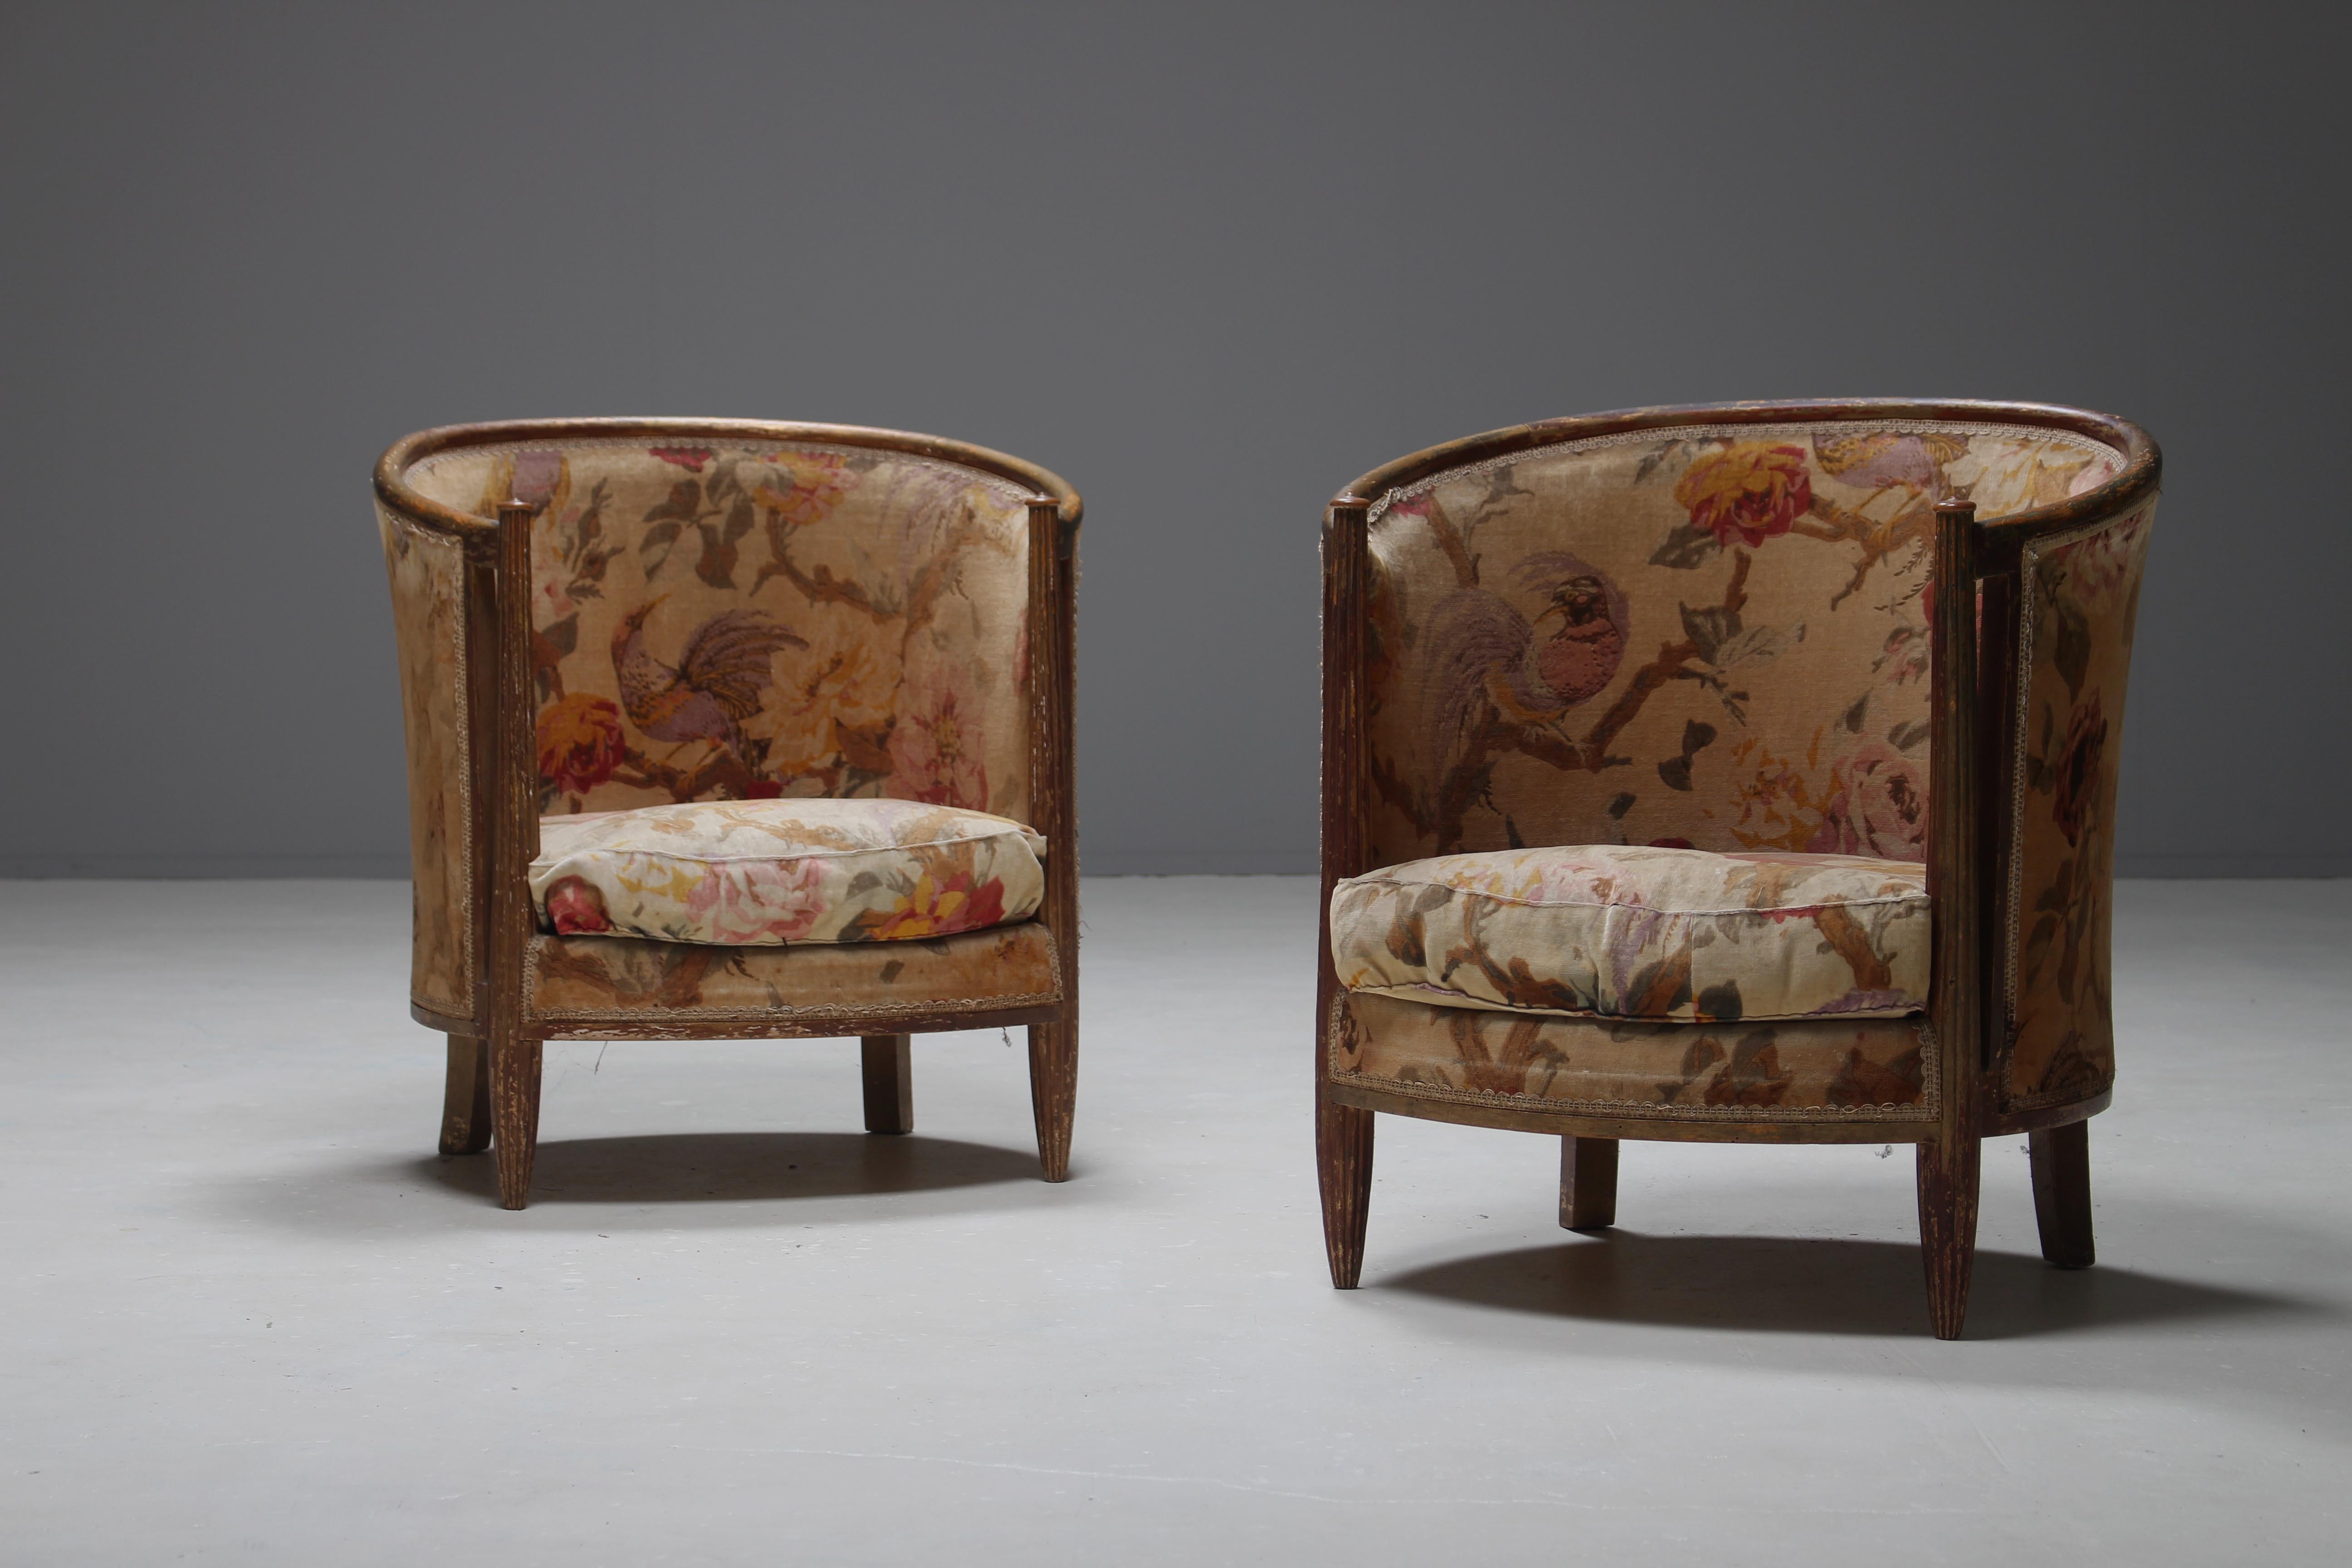 Important Early and Rare Gilded Paul Follot Art Nouveau Club Chairs, 1911 For Sale 10